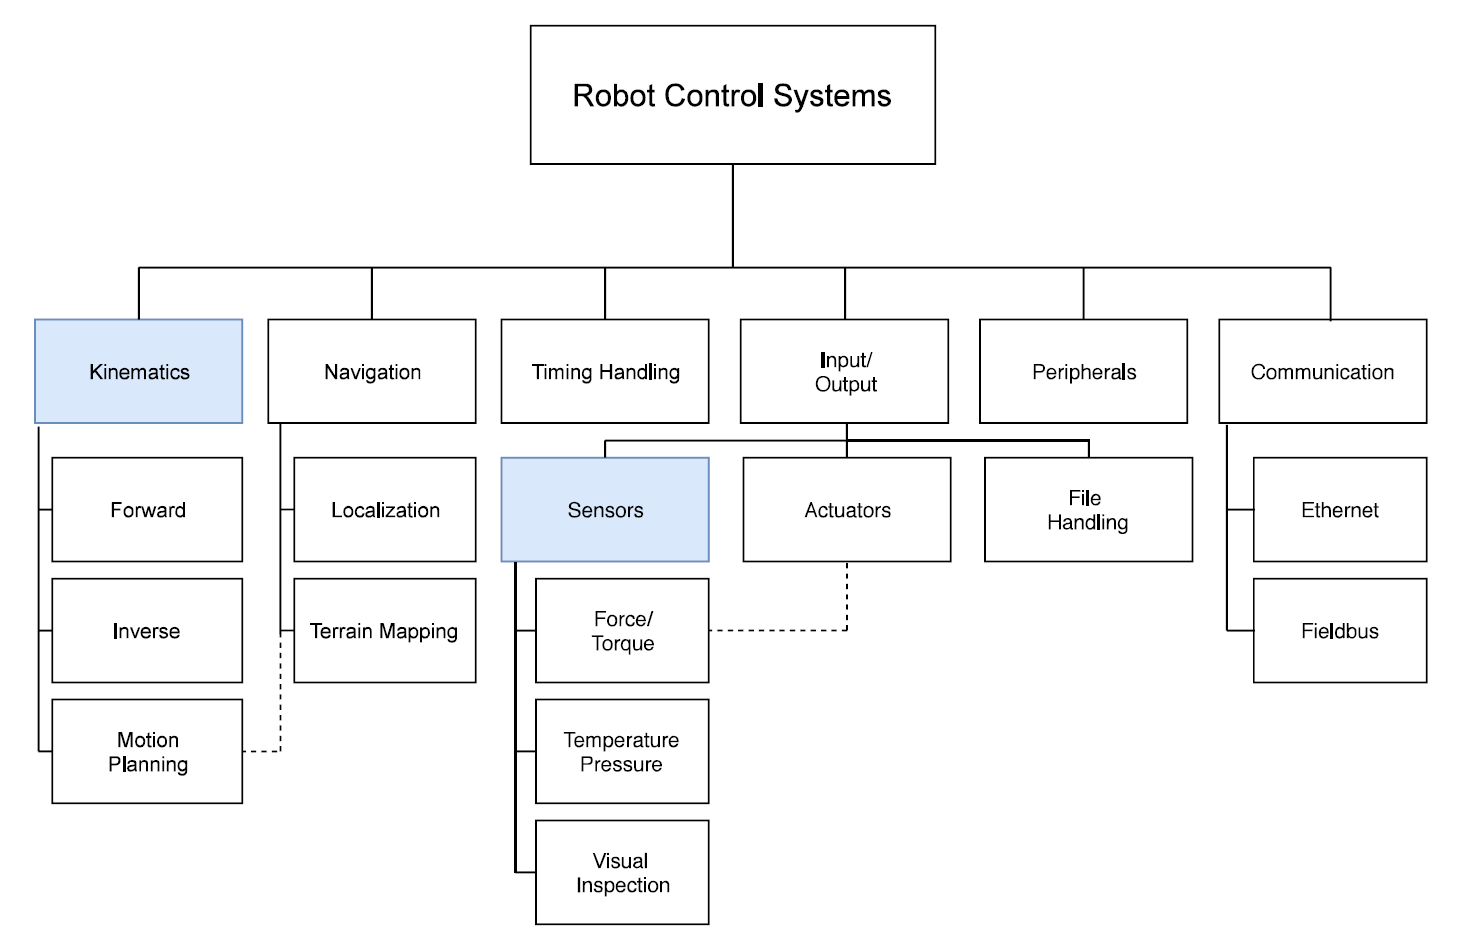 Robot Control Systems Generally